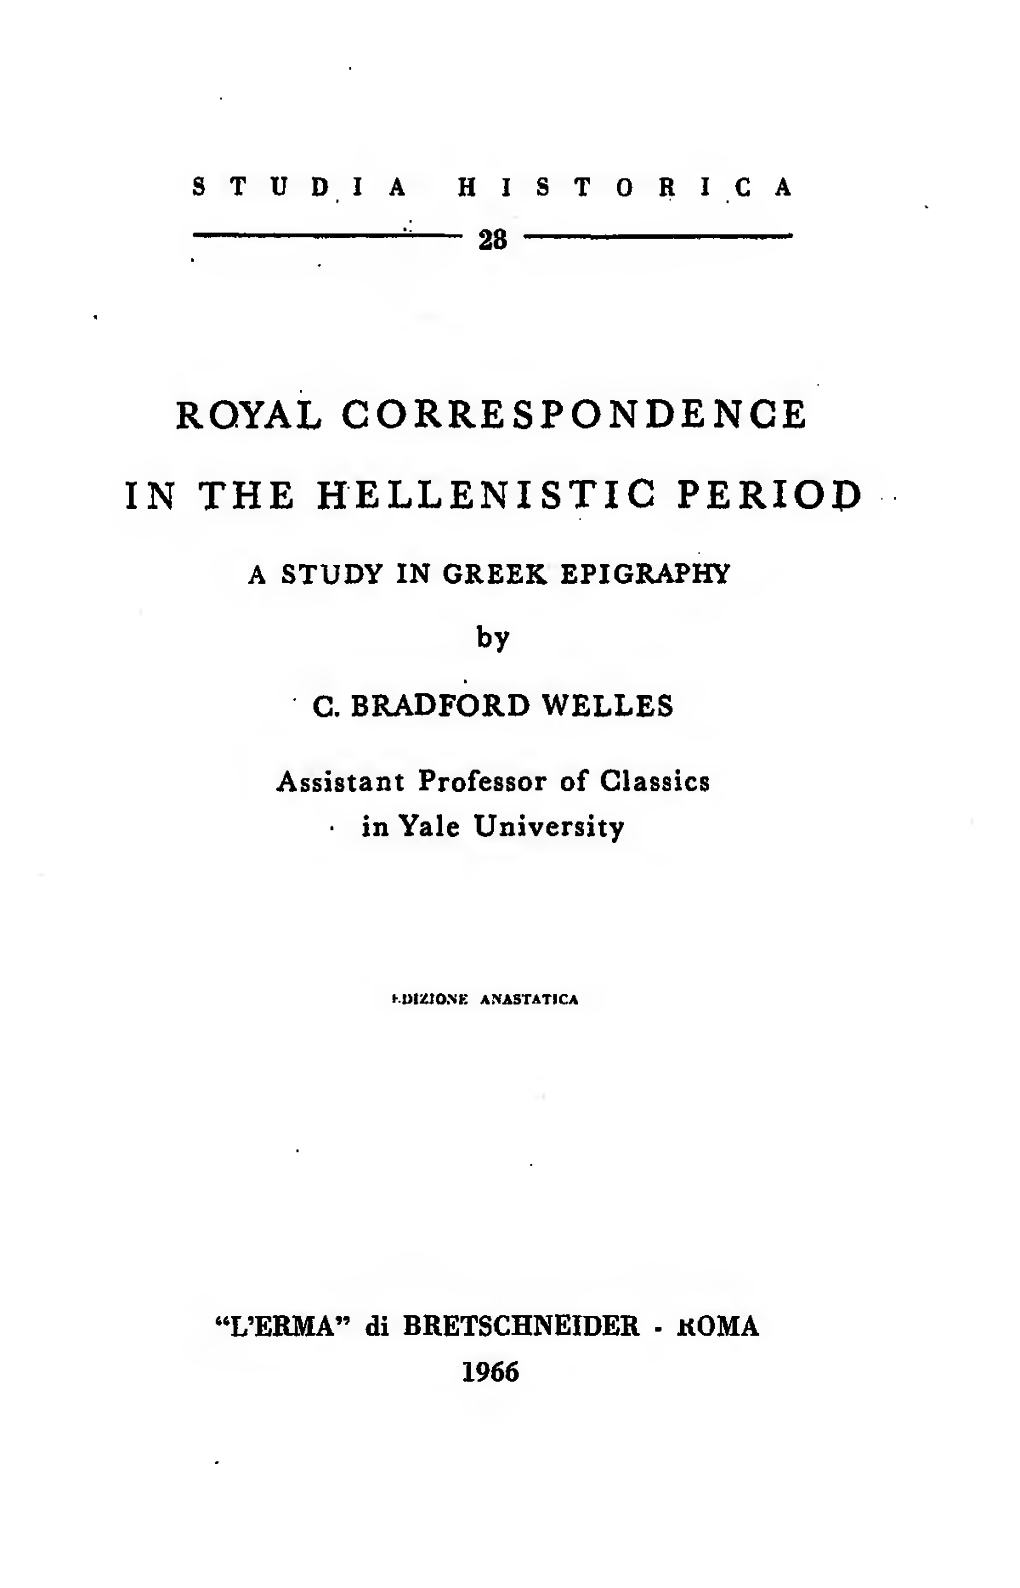 Royal Correspondence in the Hellenistic Period